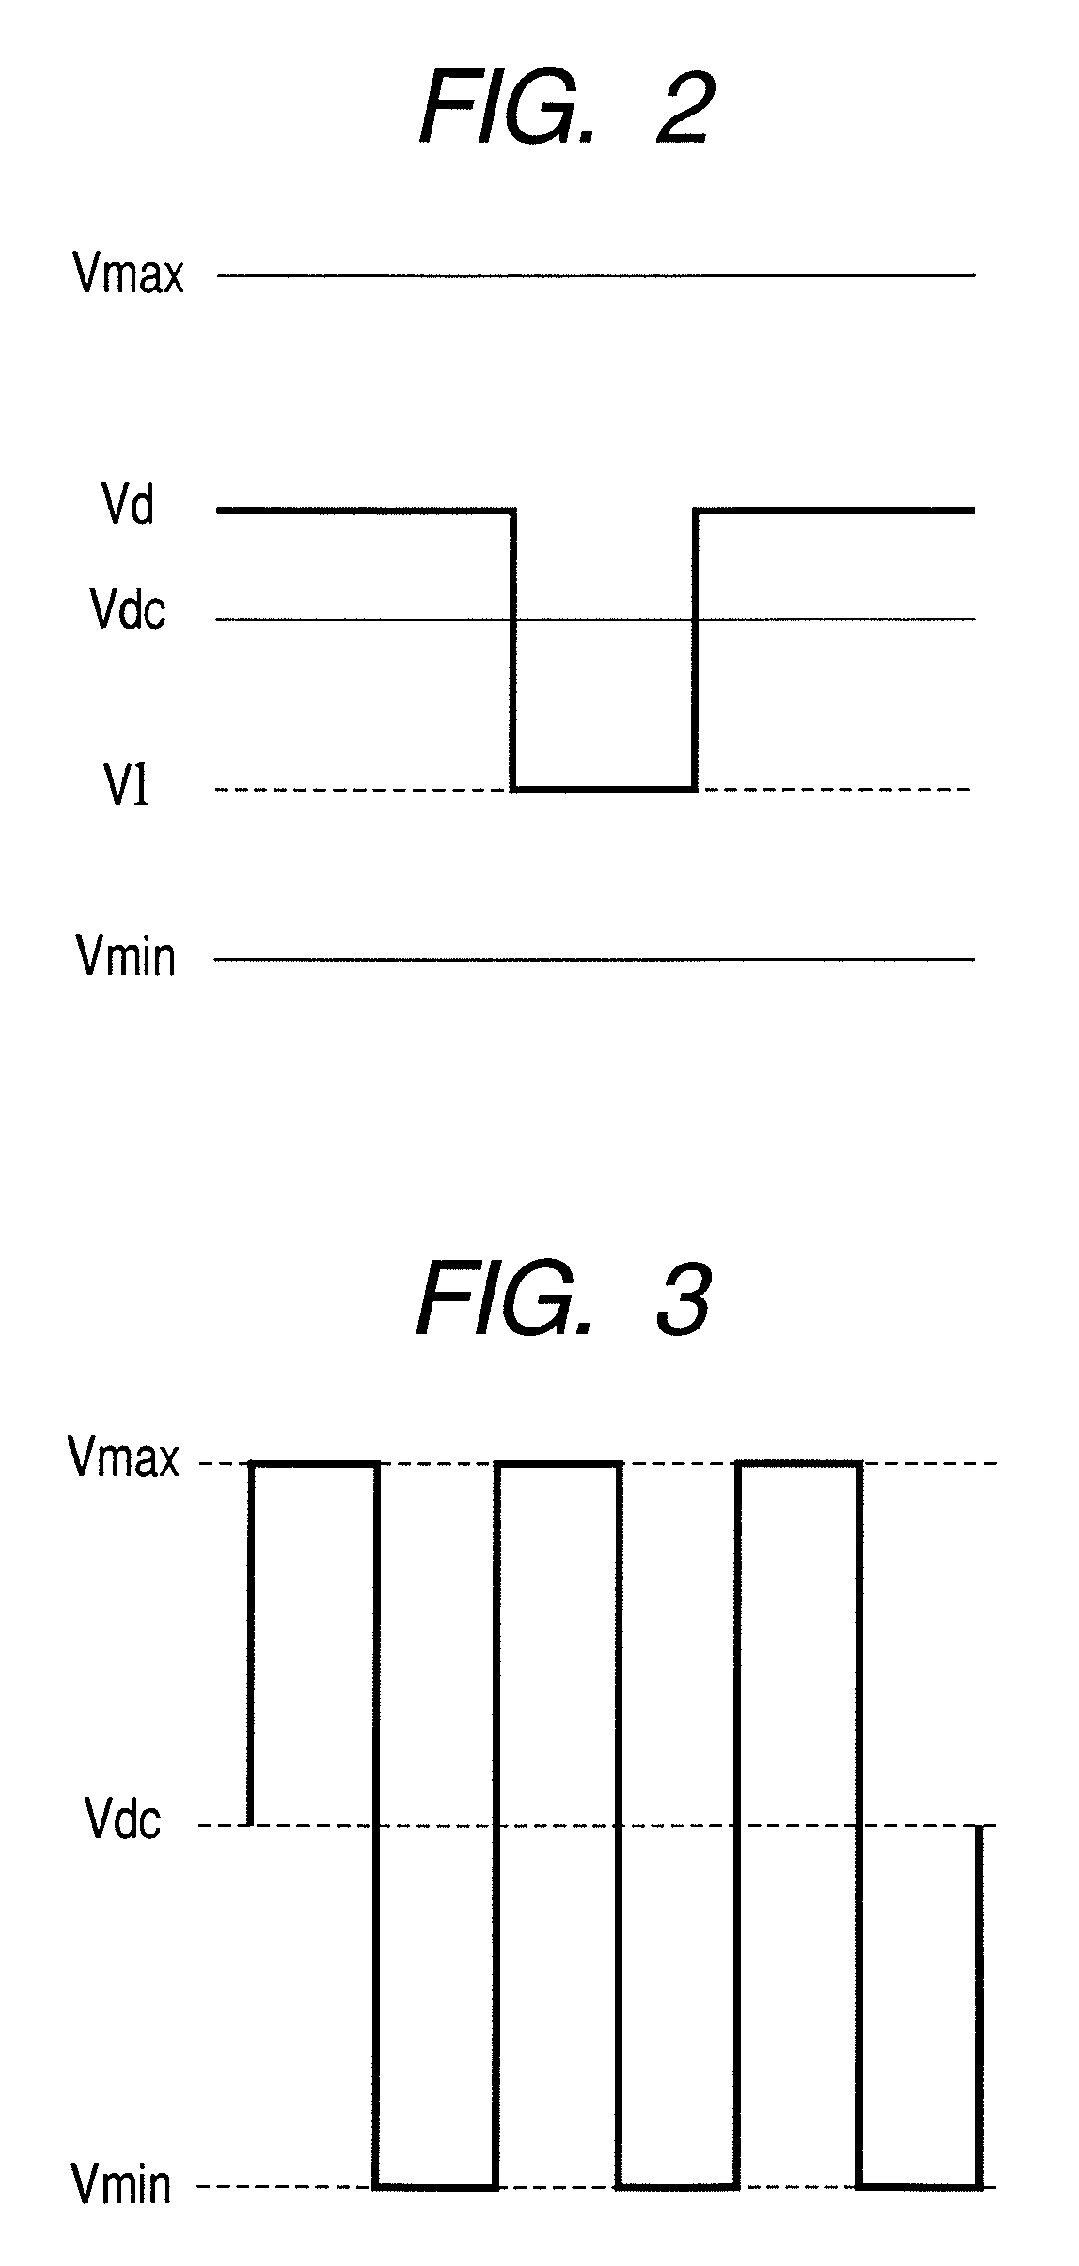 Developing apparatus including a cylindrical developer carrying member conveying a magnetic mono-component developer